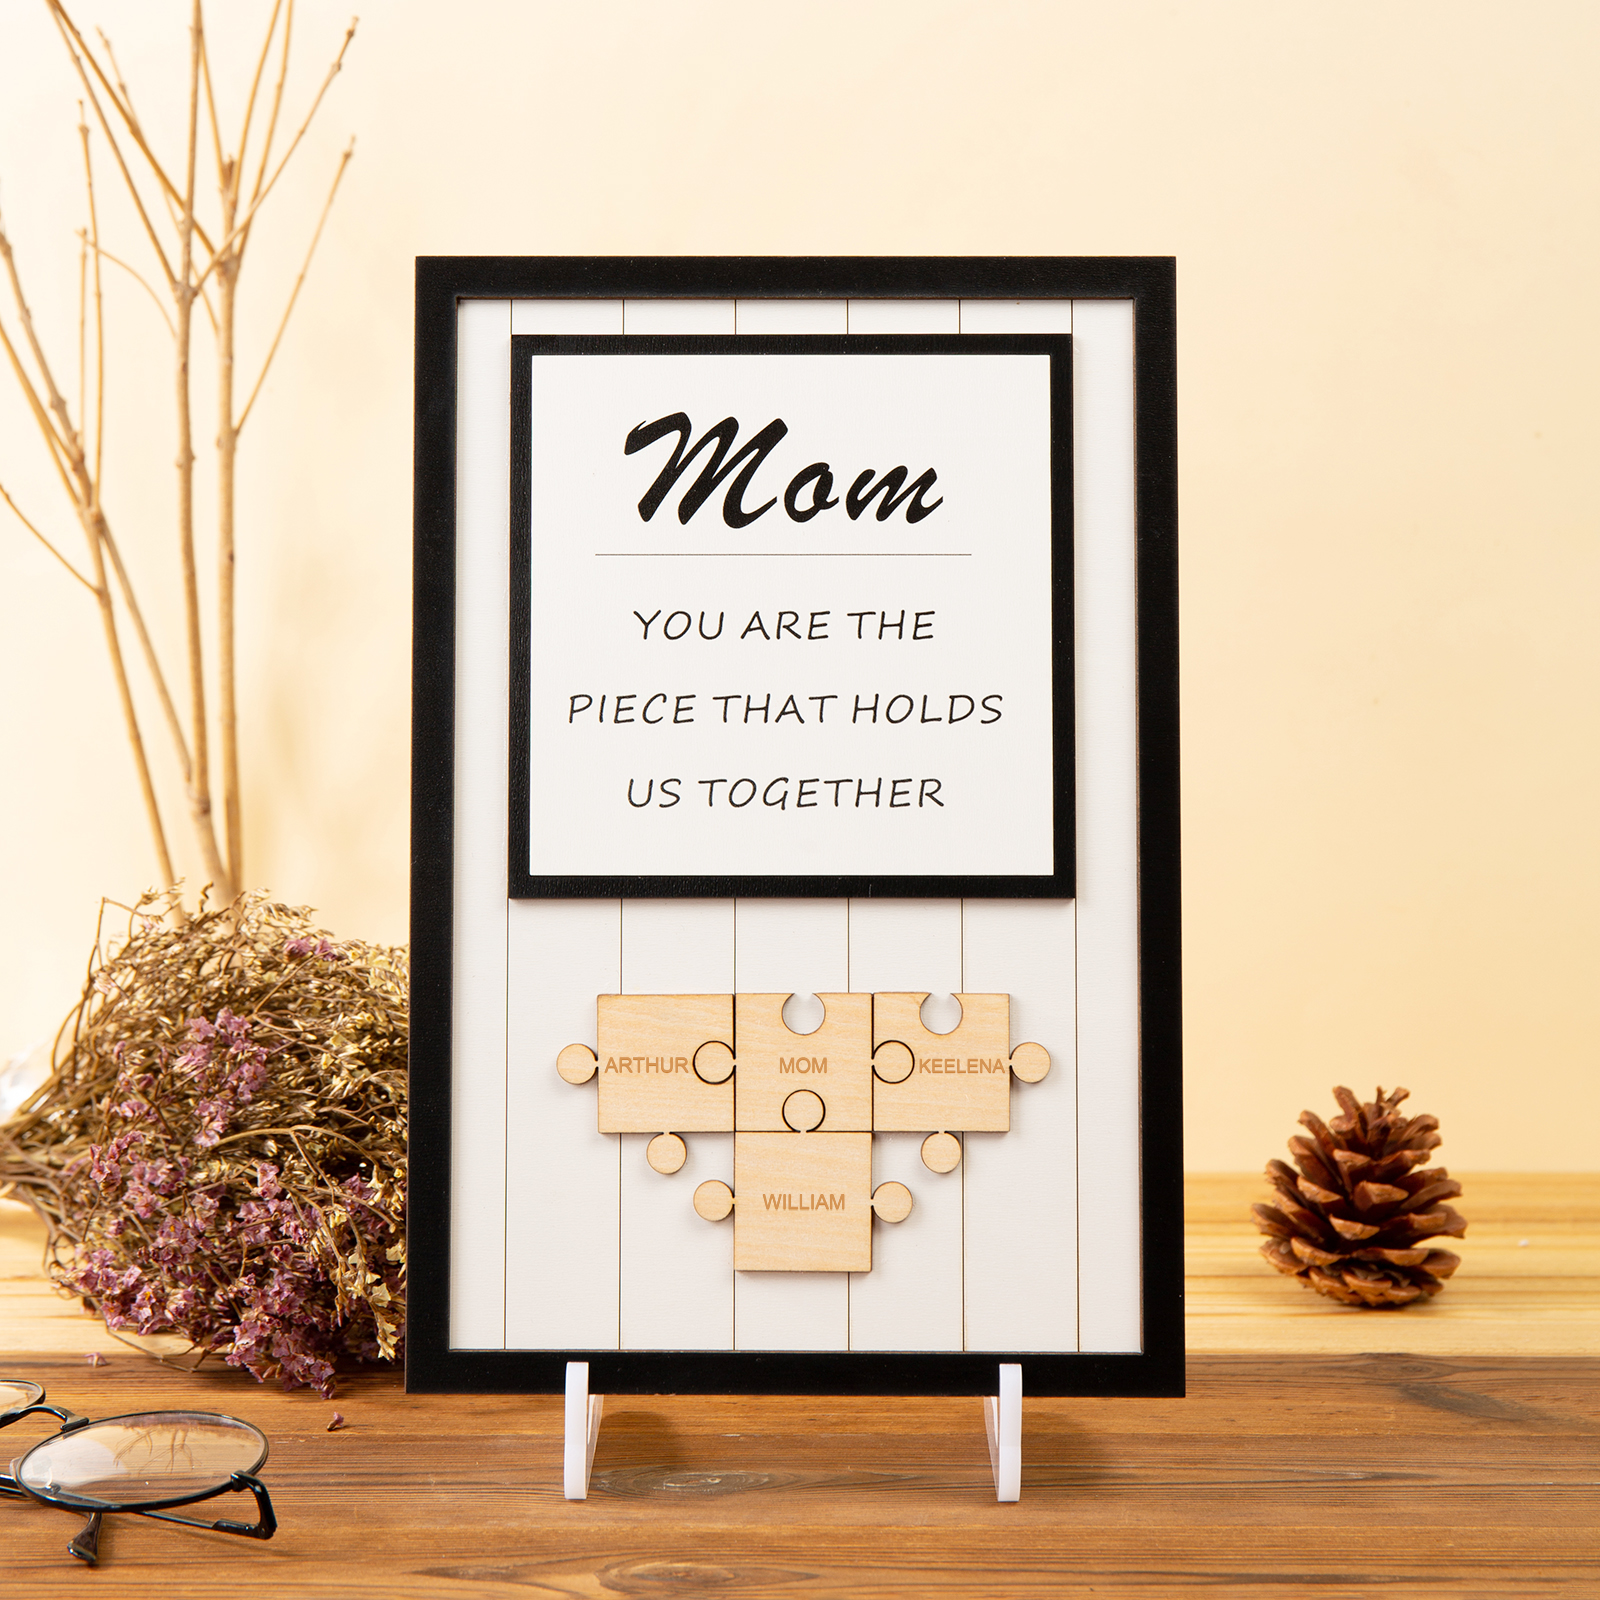 Mother's Day Gifts Mom Puzzle Sign Personalized 9 Names Wooden Sign -You Are the Piece that Holds Us Together